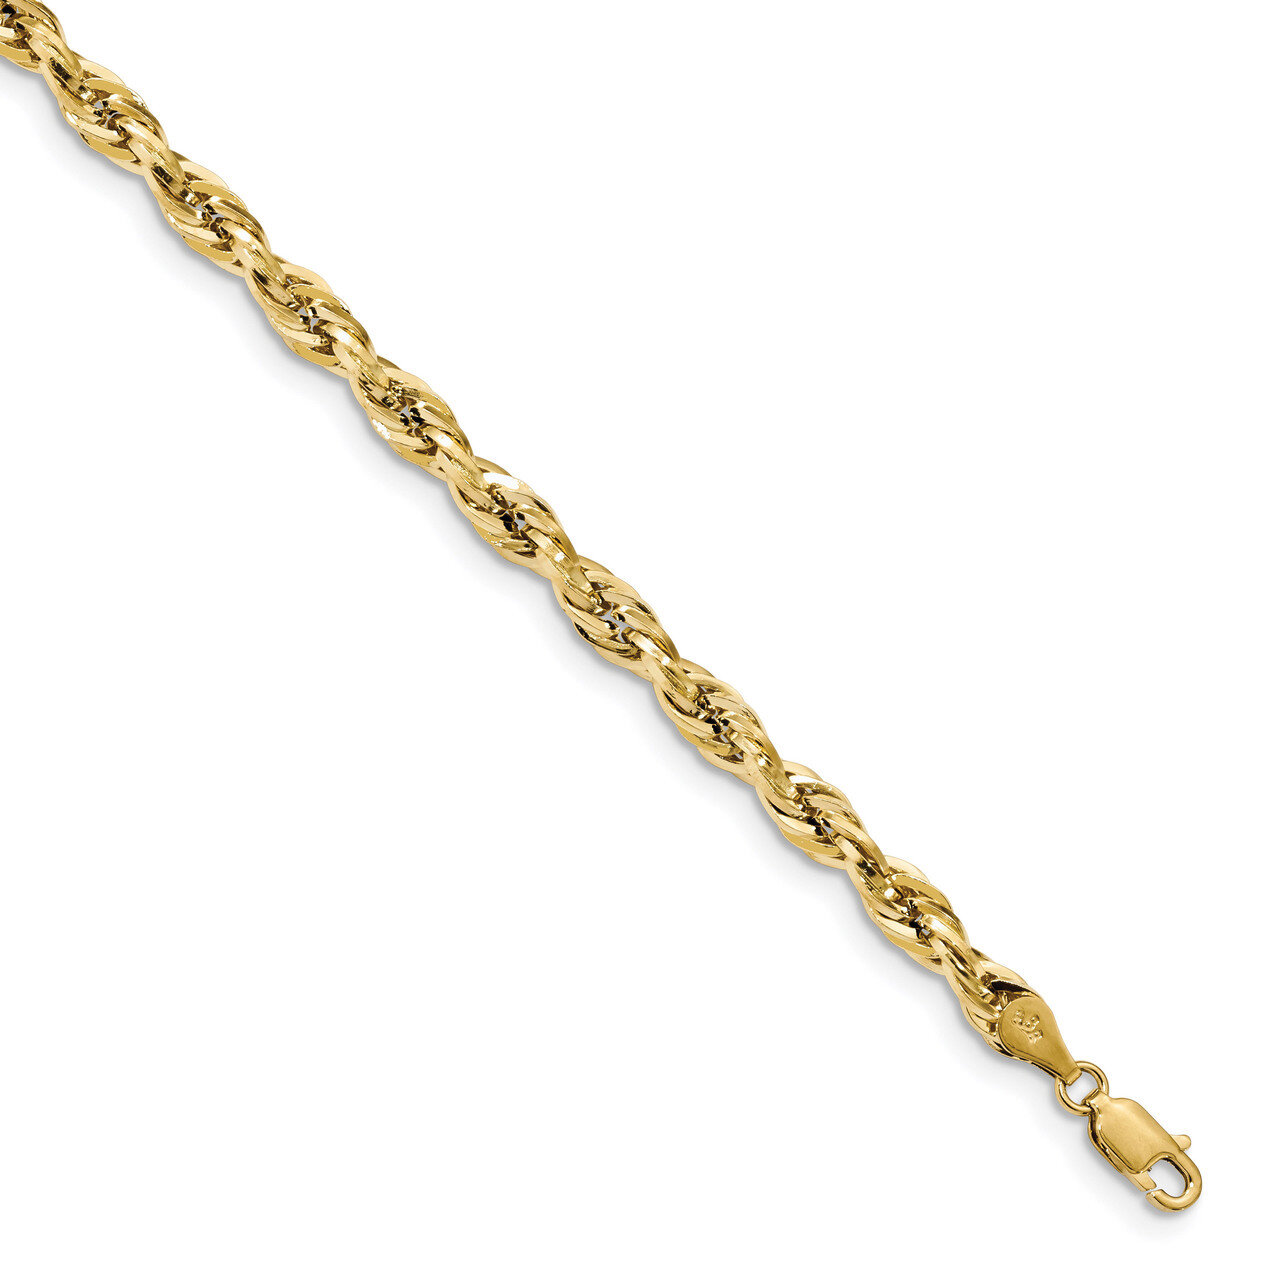 8 Inch 4.75mm Hollow Rope Chain 14k Gold BC169-8